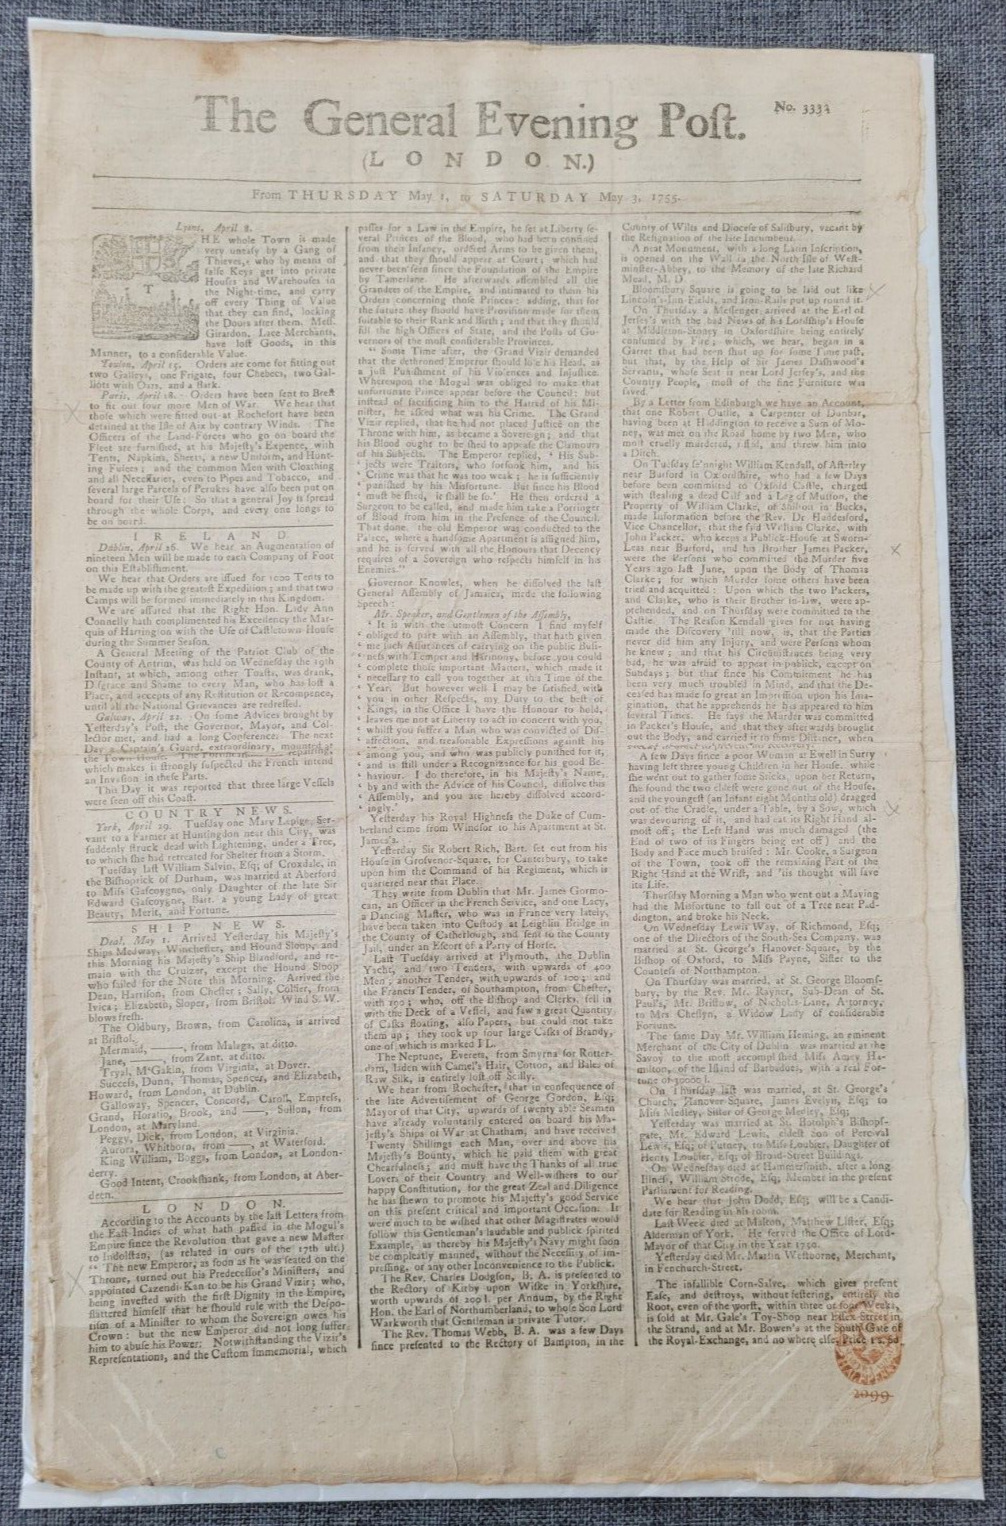 THE GENERAL EVENING POST LYONS FRANCE THEIVES 3RD MAY 1755 ORIGINAL NEWSPAPER